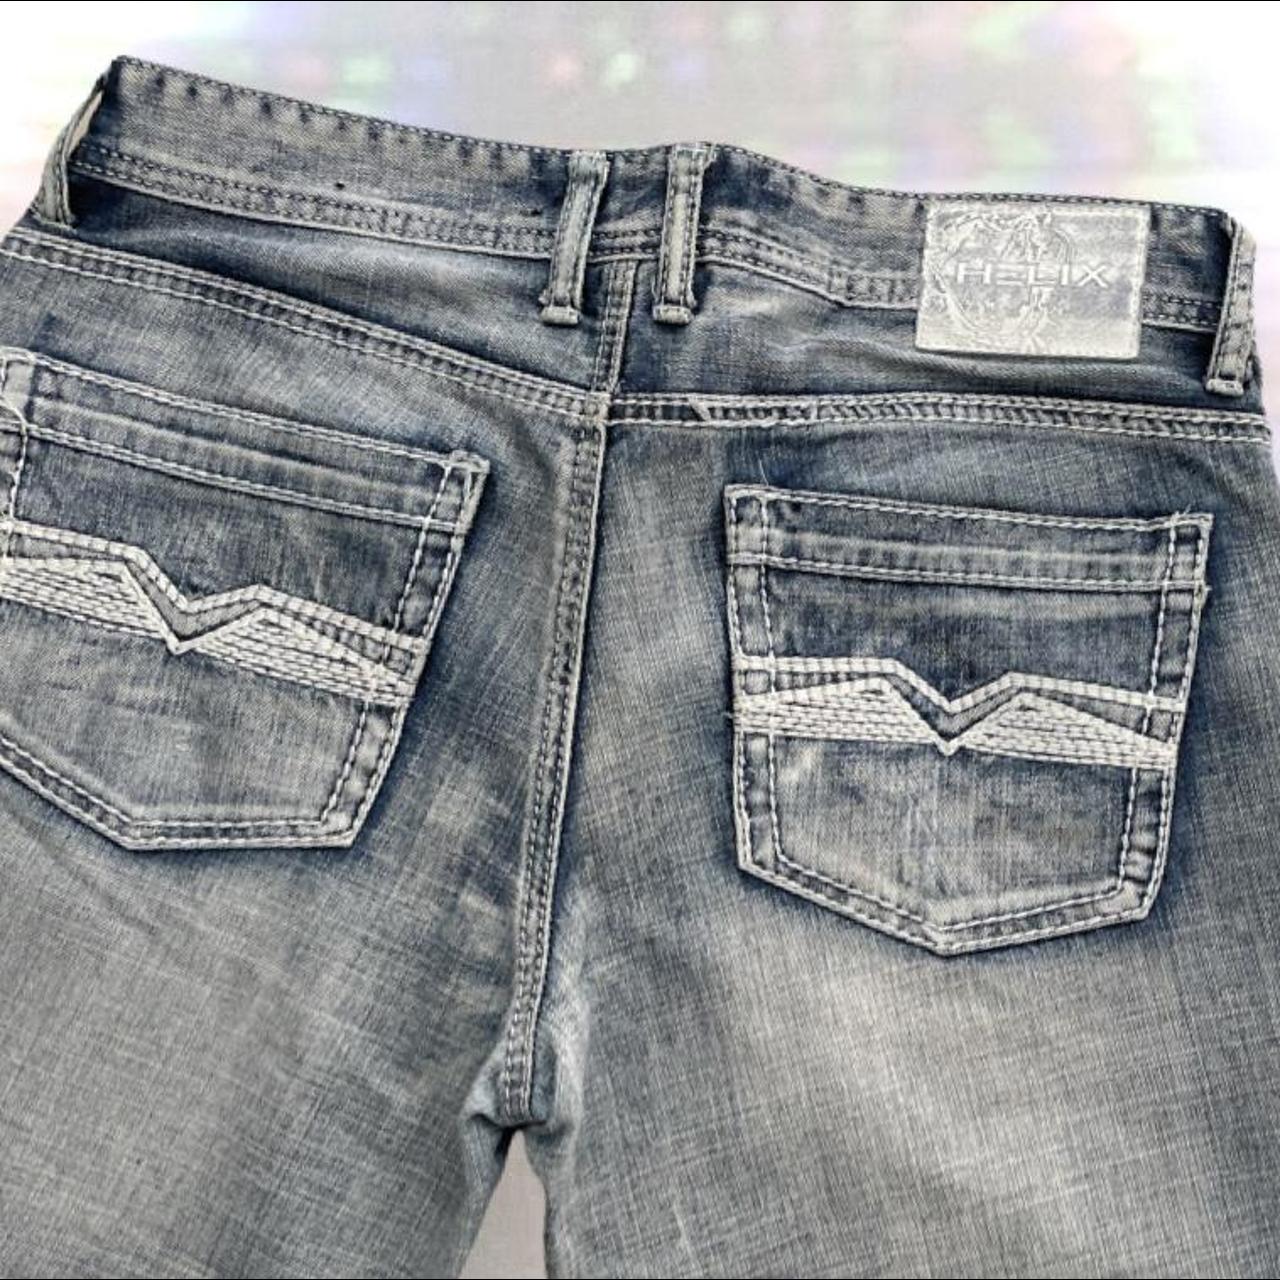 Product Image 3 - 2000s HELIX Jeans Baggy Straight